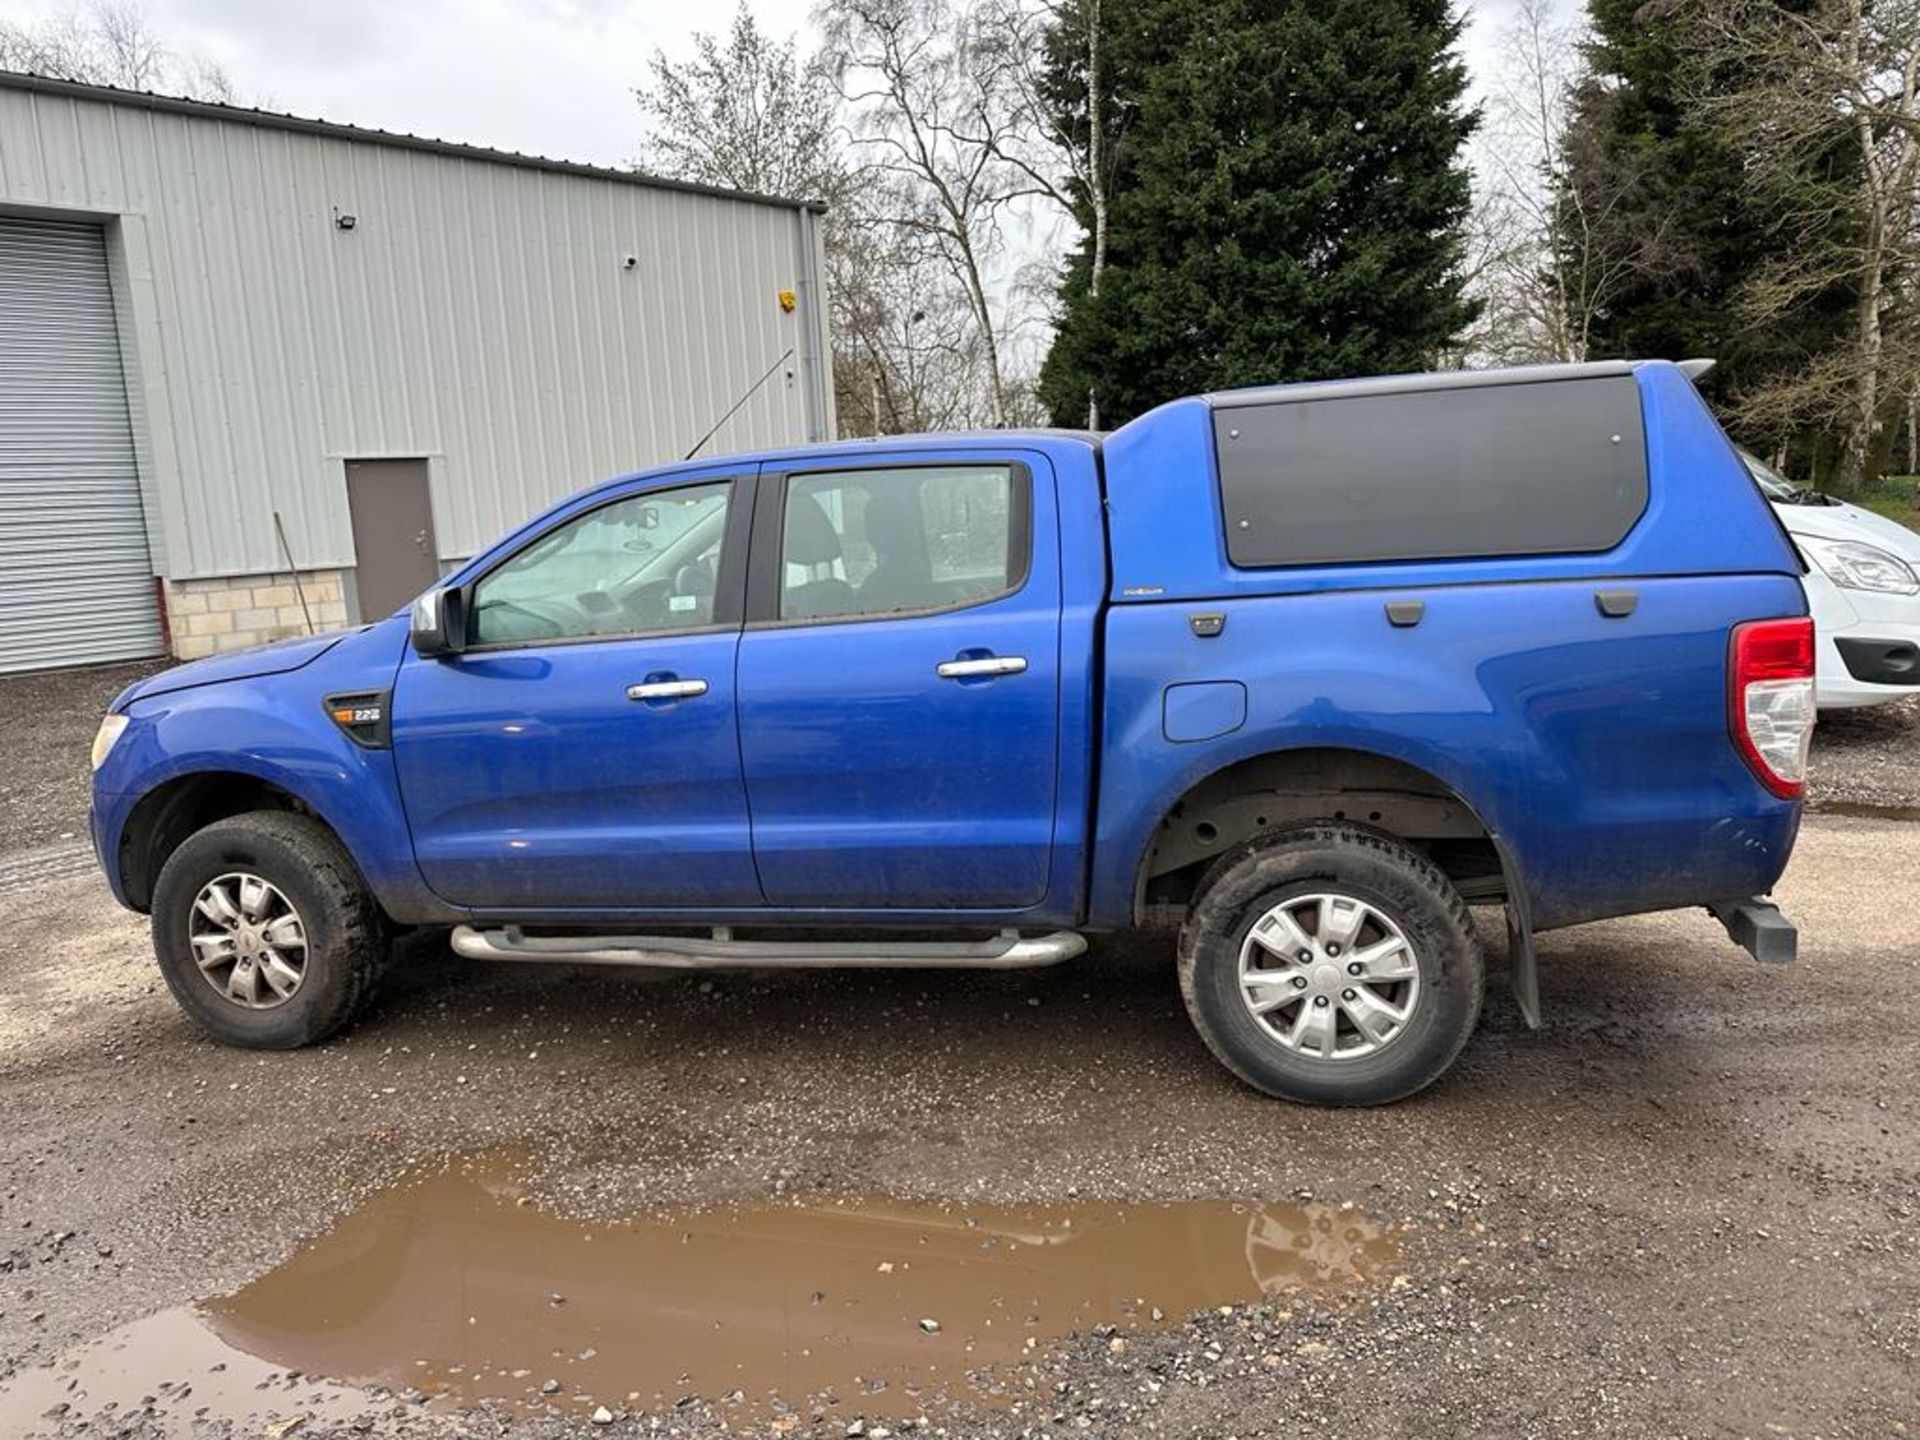 2012 62 FORD RANGER - TOWBAR - REAR CANOPY - ALLOY WHEELS - 63K MILES - AF62 HMY - Image 3 of 5